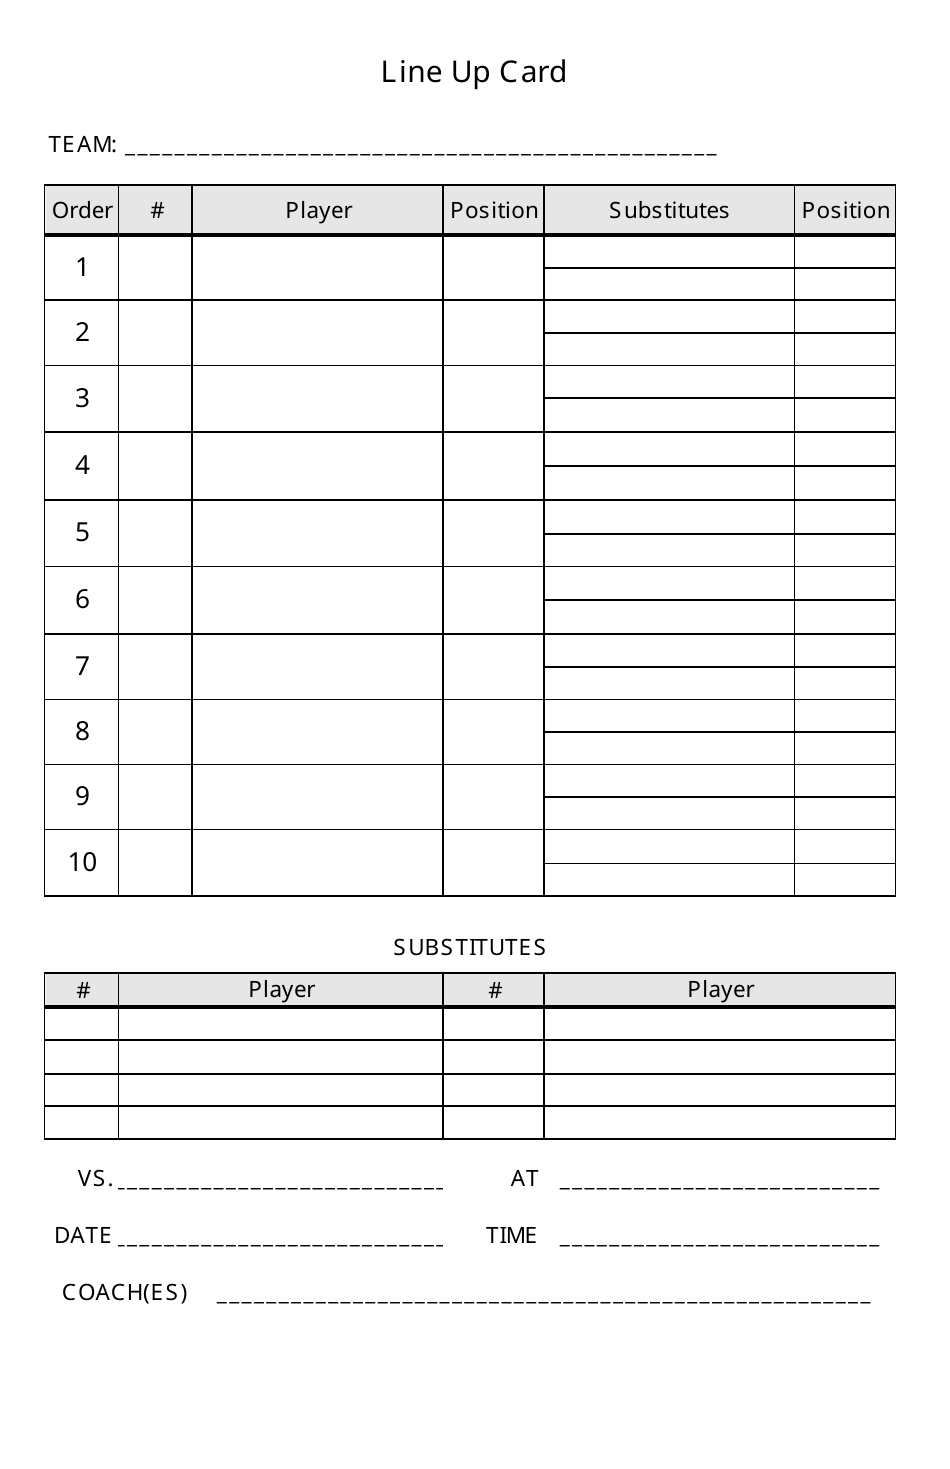 Baseball Line up Card Template - Free Download